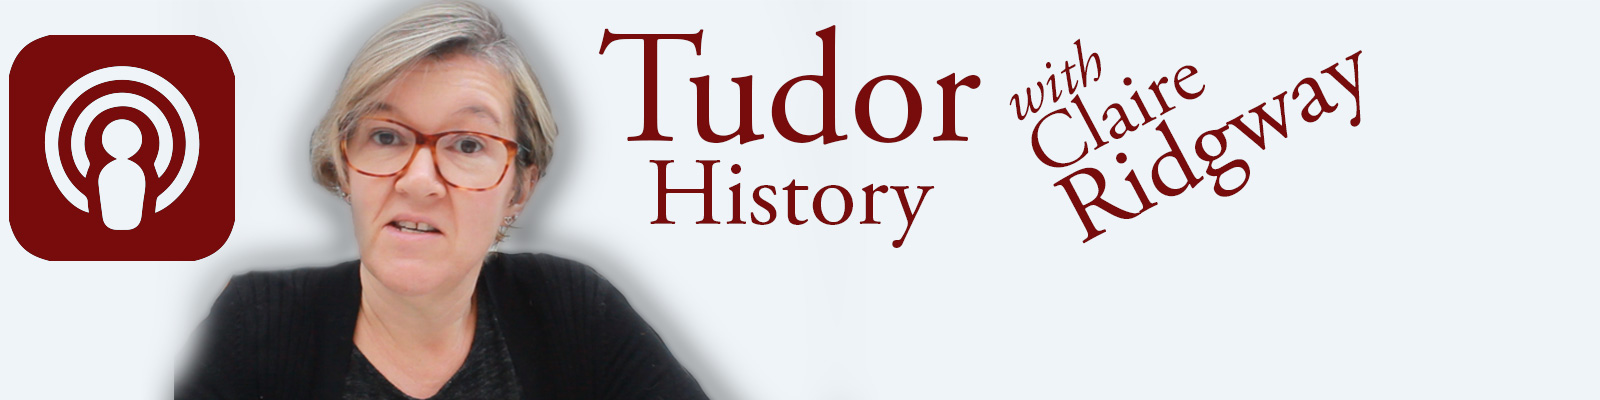 Tudor History with Claire Ridgway